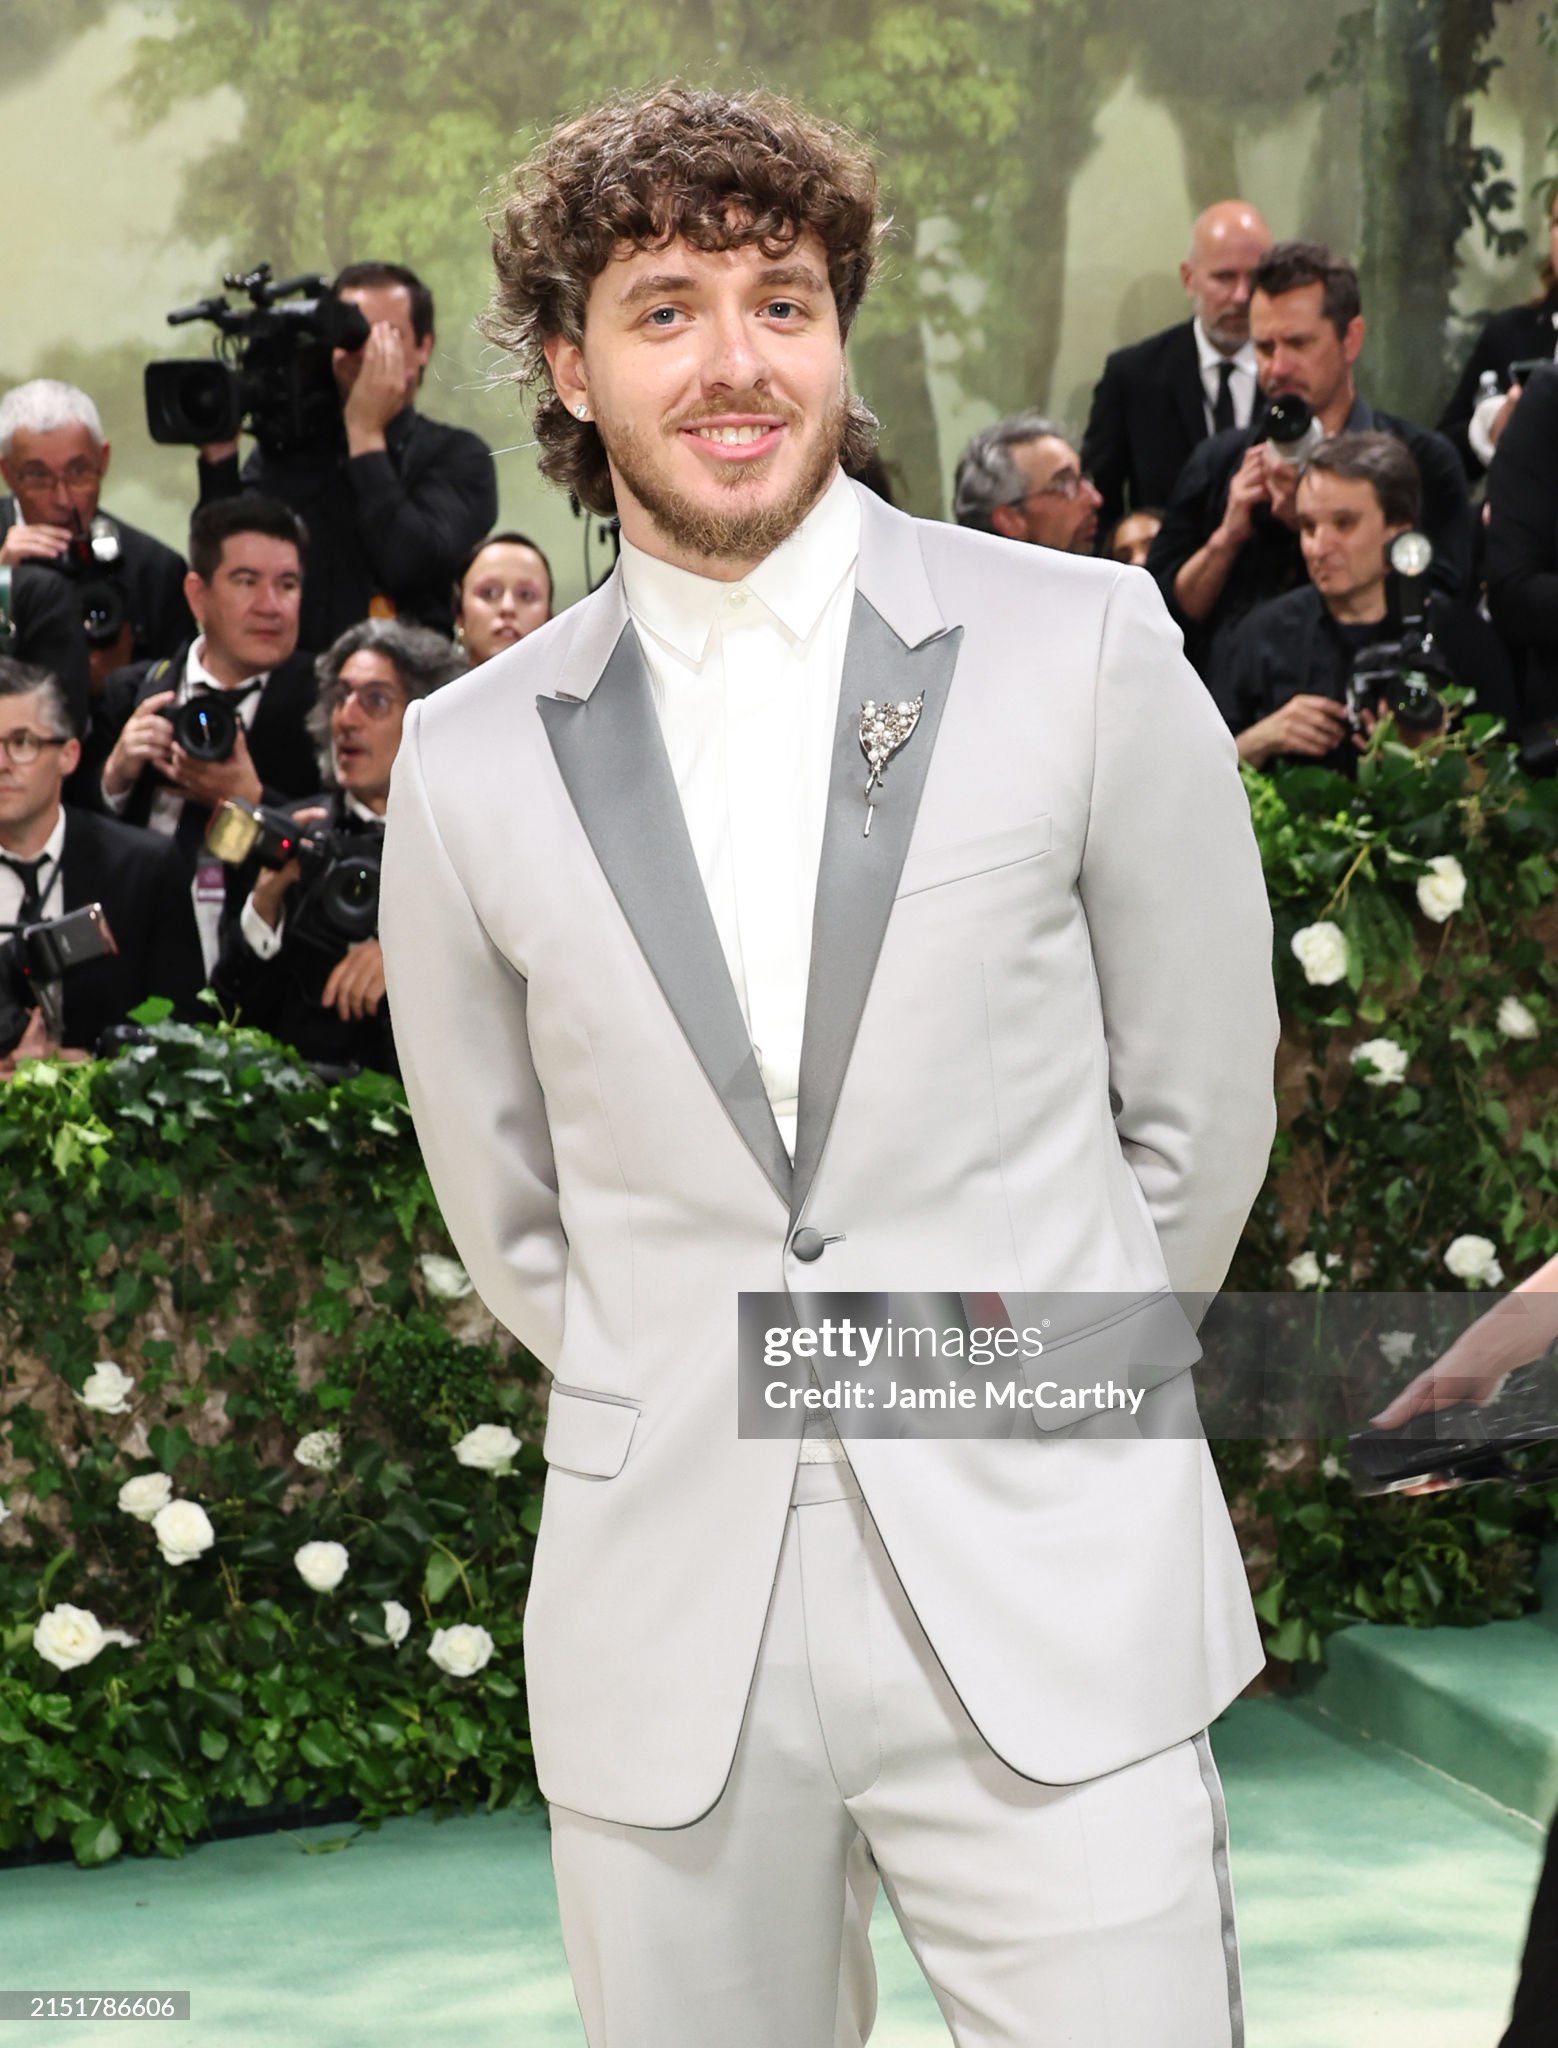 gettyimages-2151786606-2048x2048.jpg